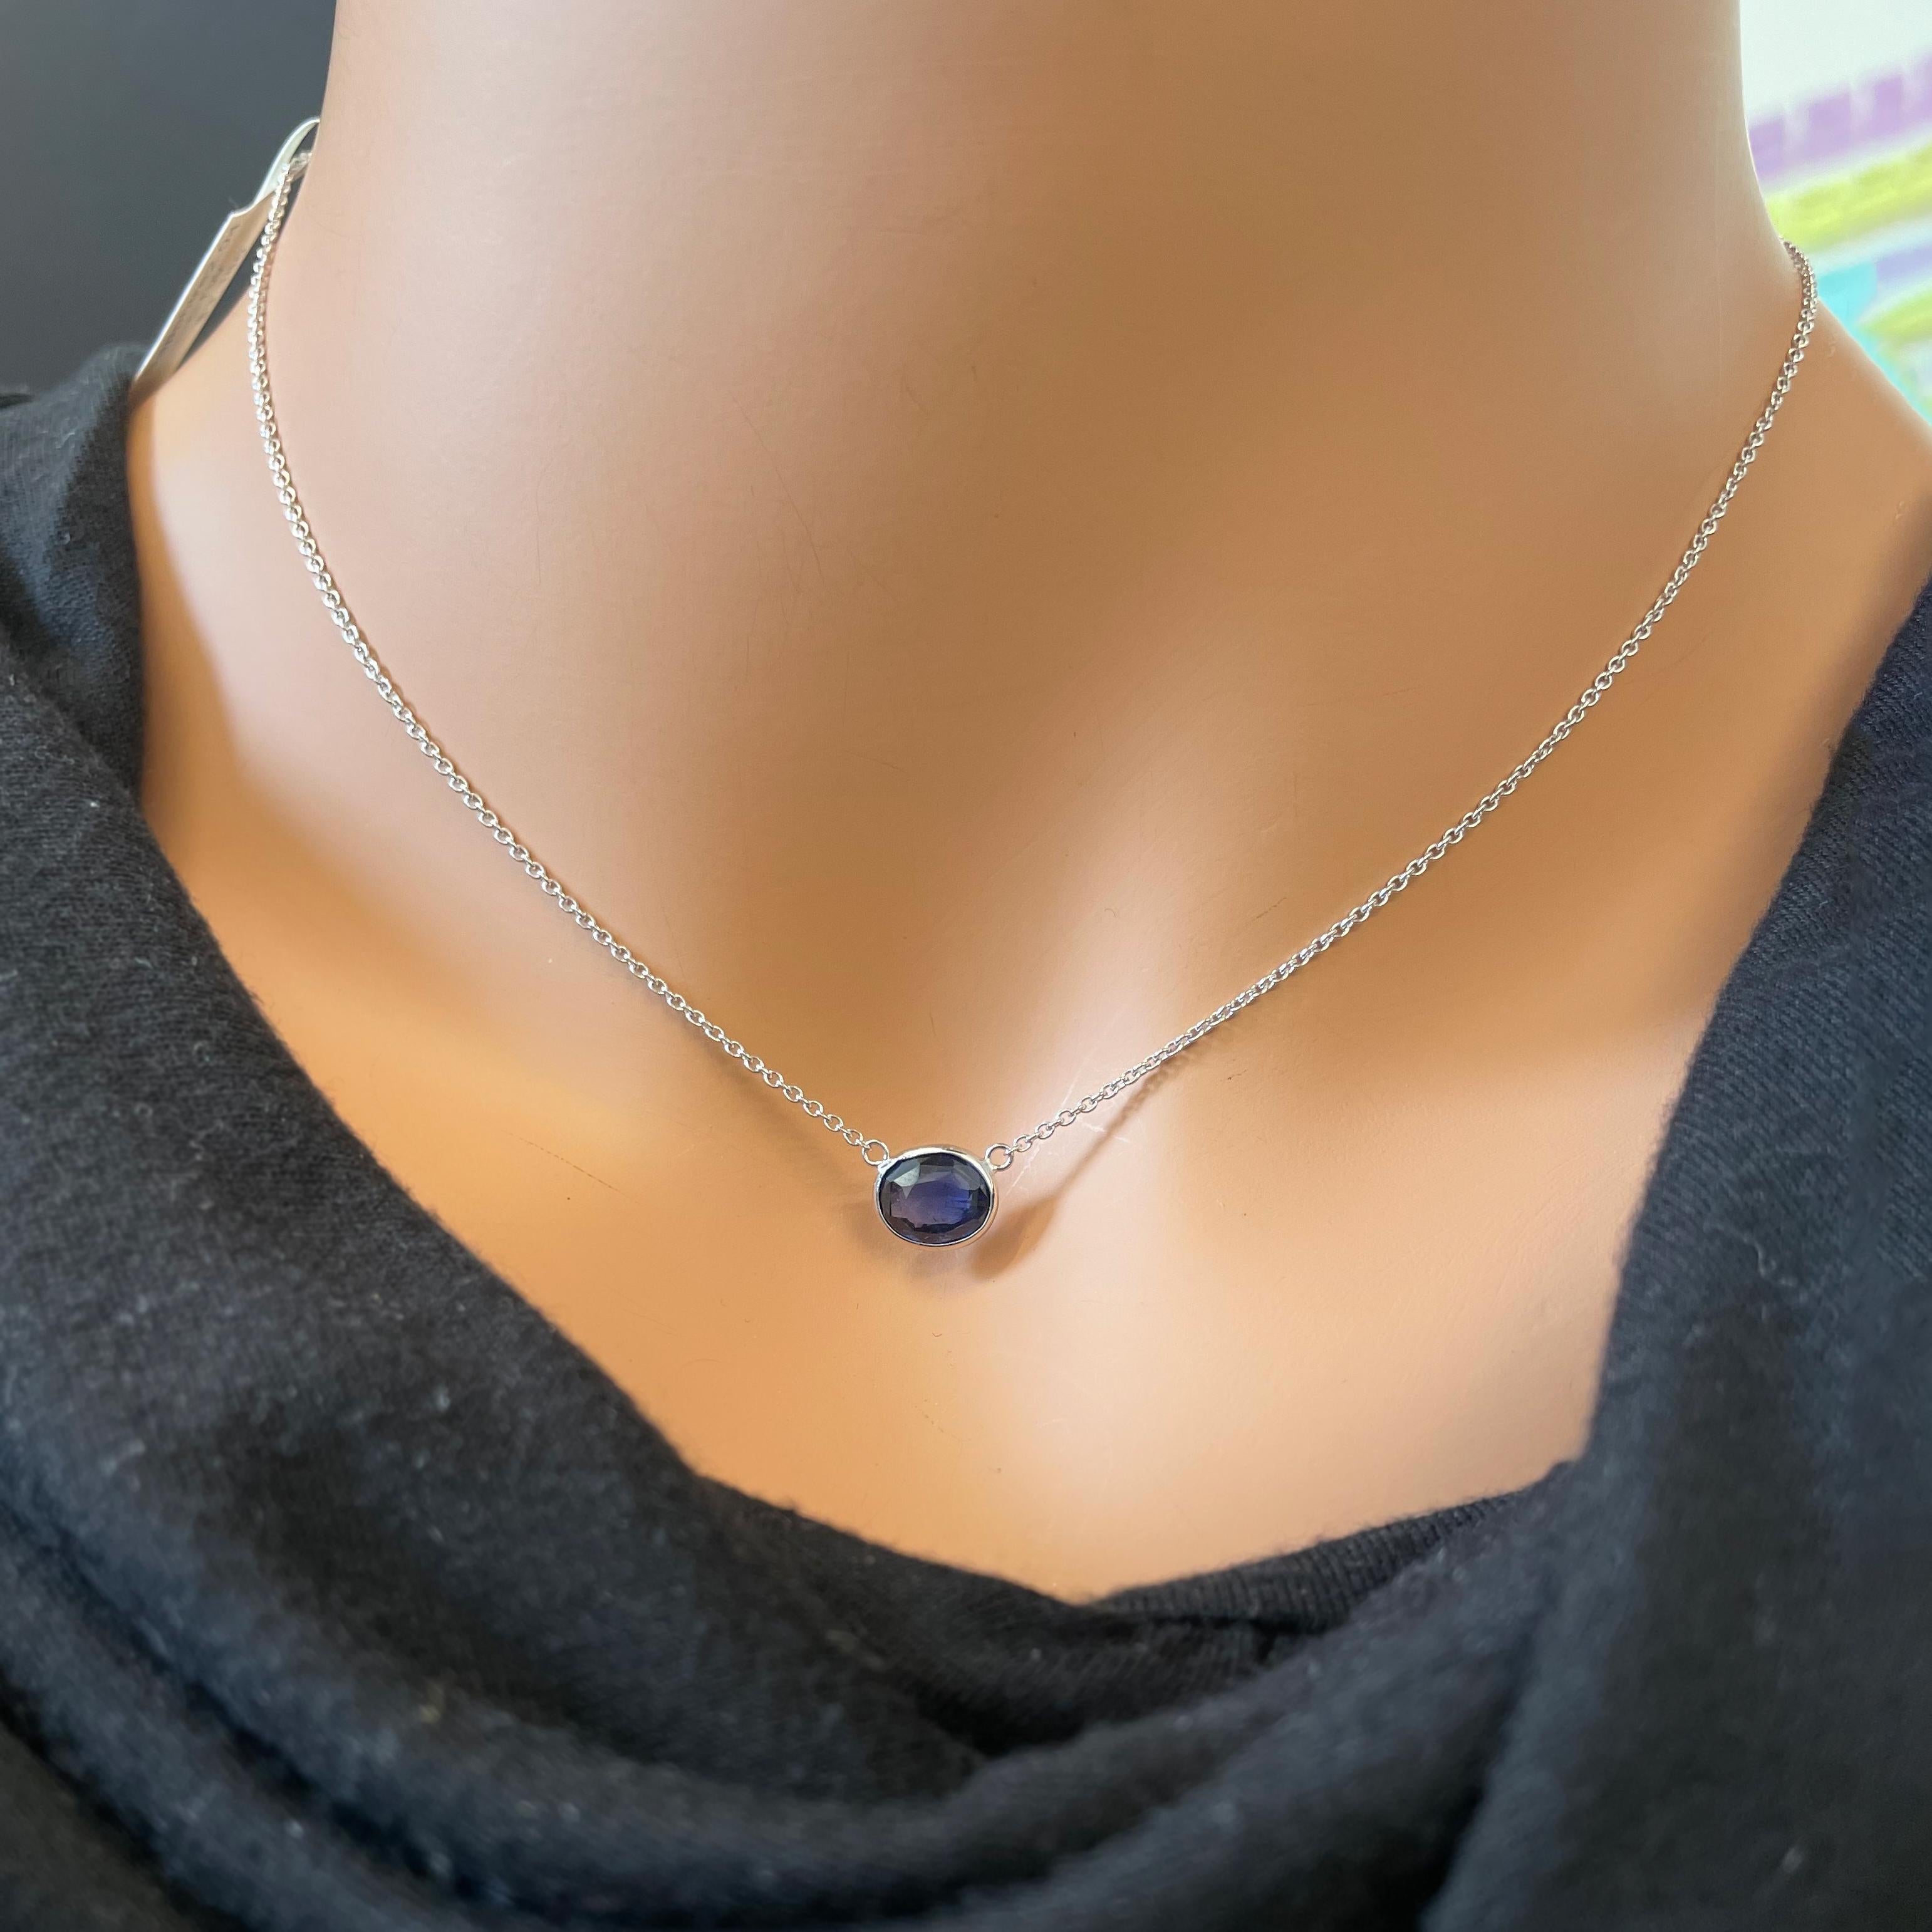 Oval Cut 2.04 Carat Blue Oval Sapphire Fashion Necklaces In 14K White Gold  For Sale